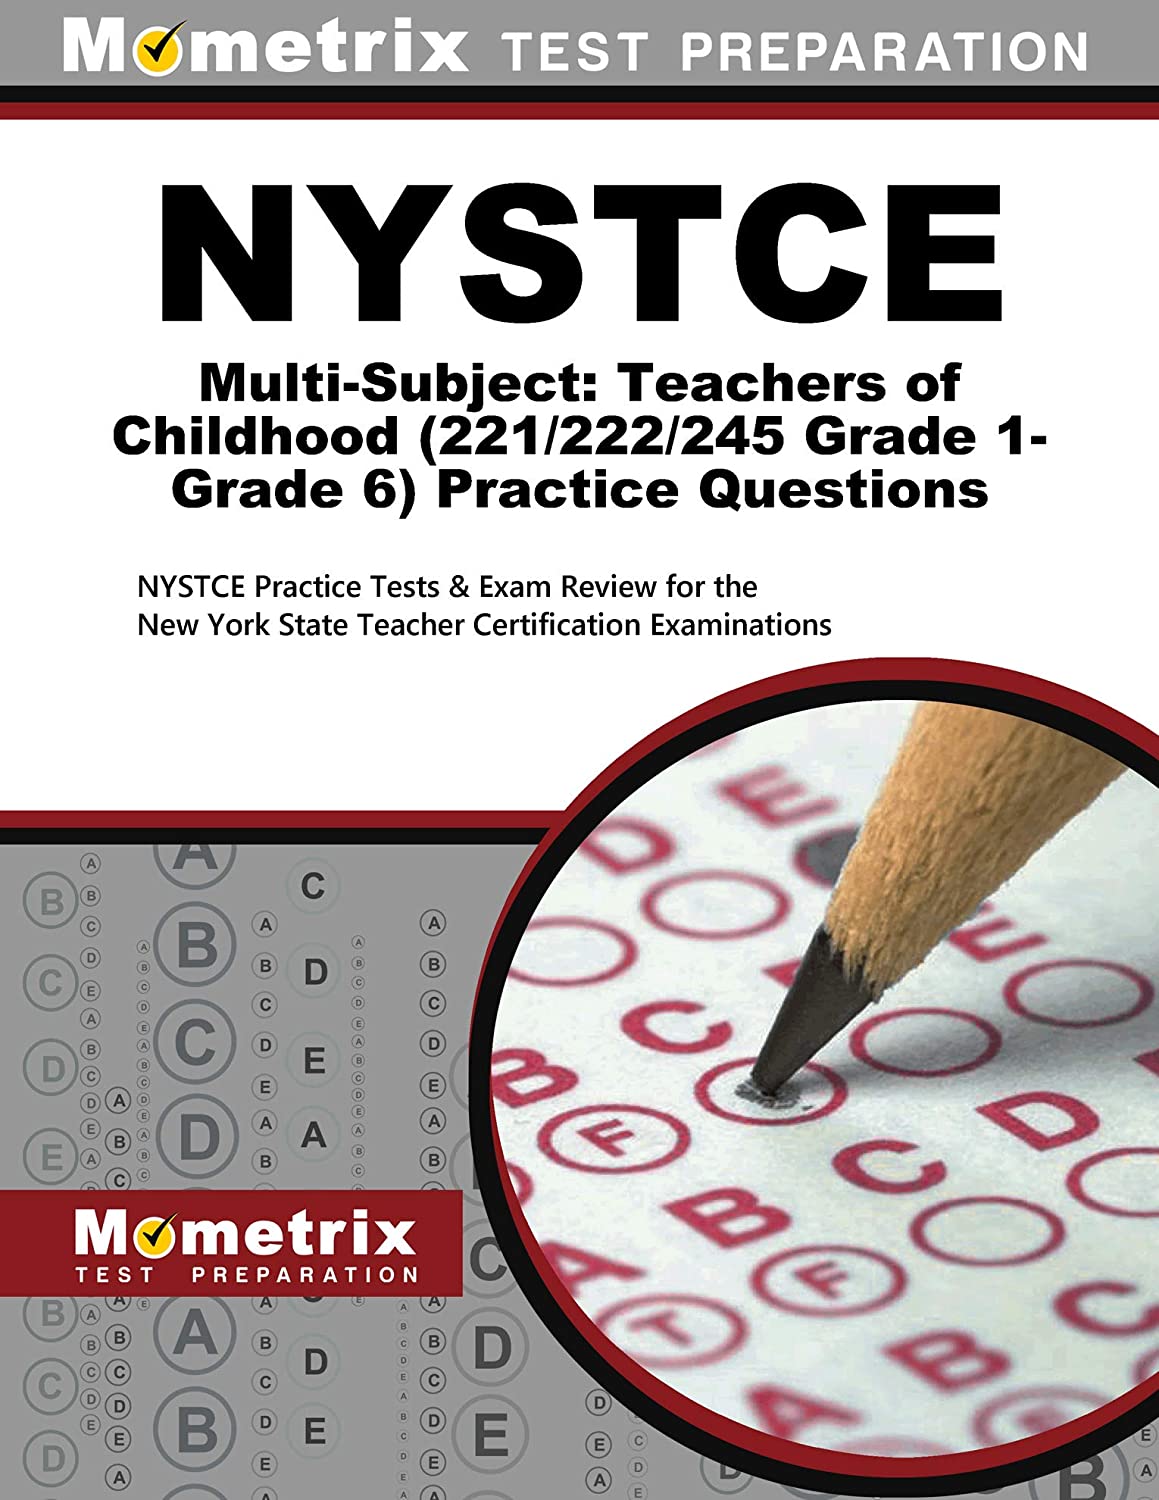 NYSTCE Multi-Subject: Teachers of Childhood (Grade 1-Grade 6) Practice Questions: NYSTCE Practice Tests and Exam Review for the New York State Teacher Certification Examinations